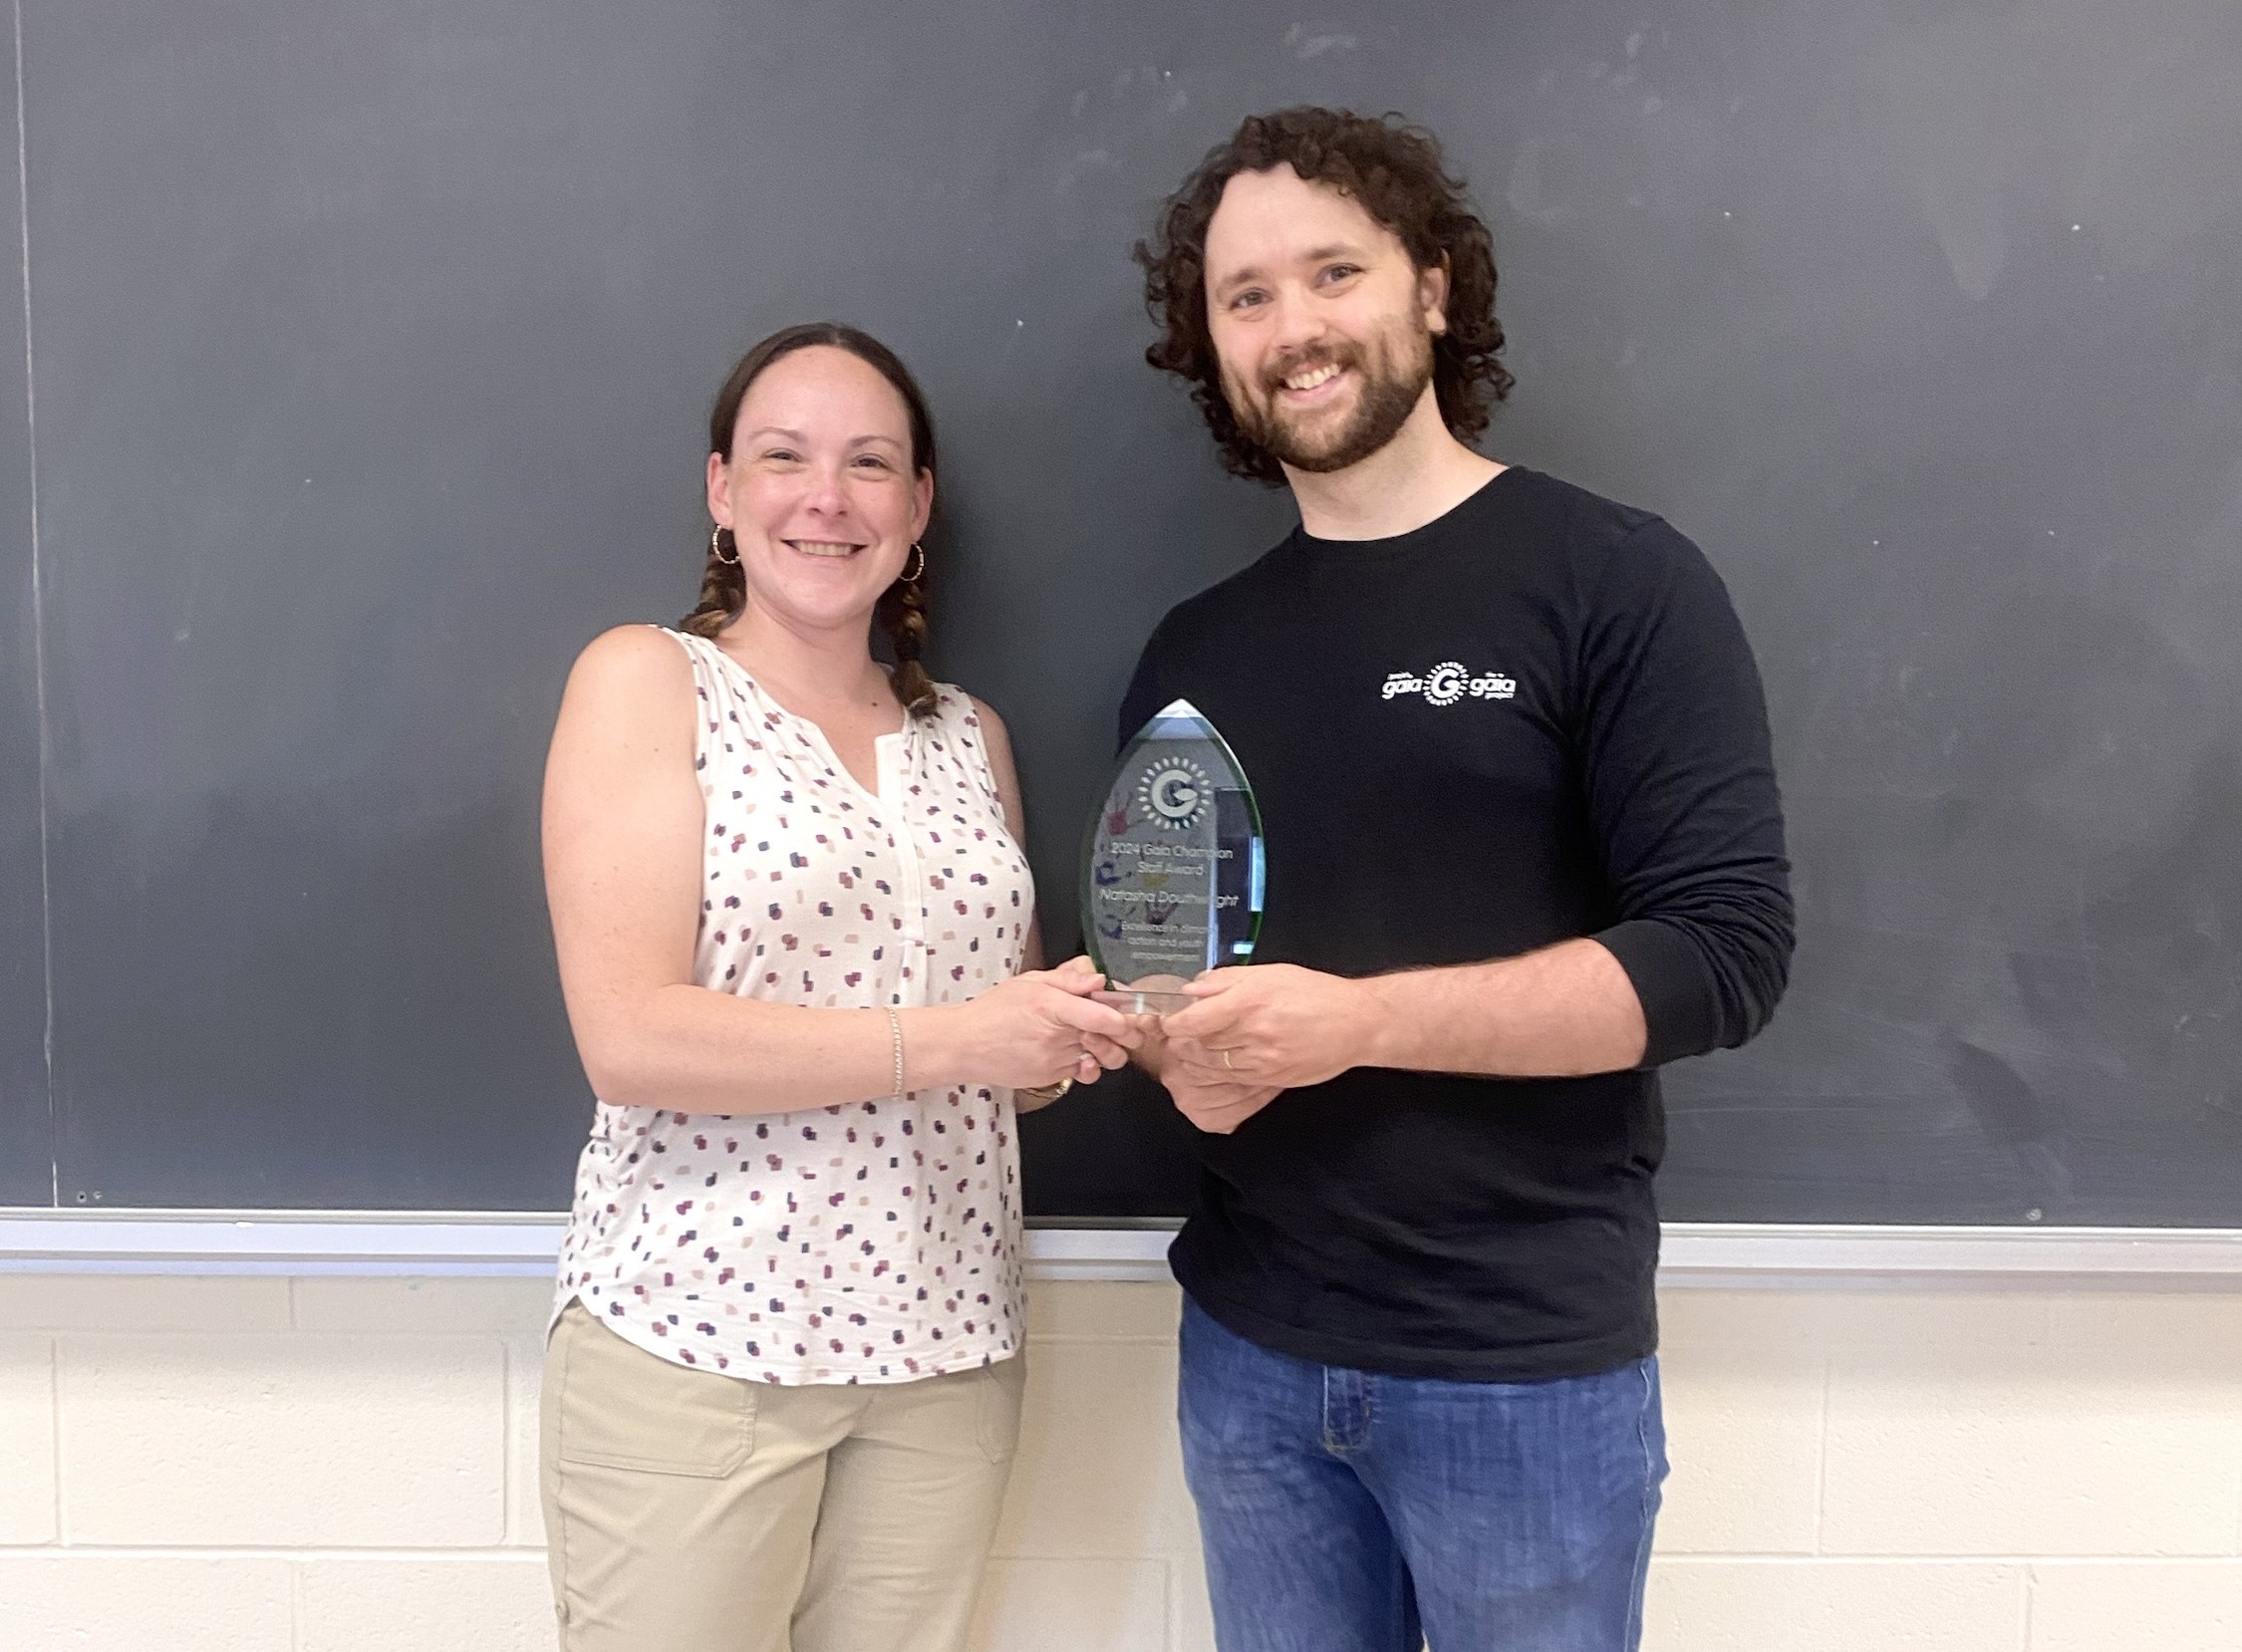 Natasha, holding her award, poses with a Gaia Project staff